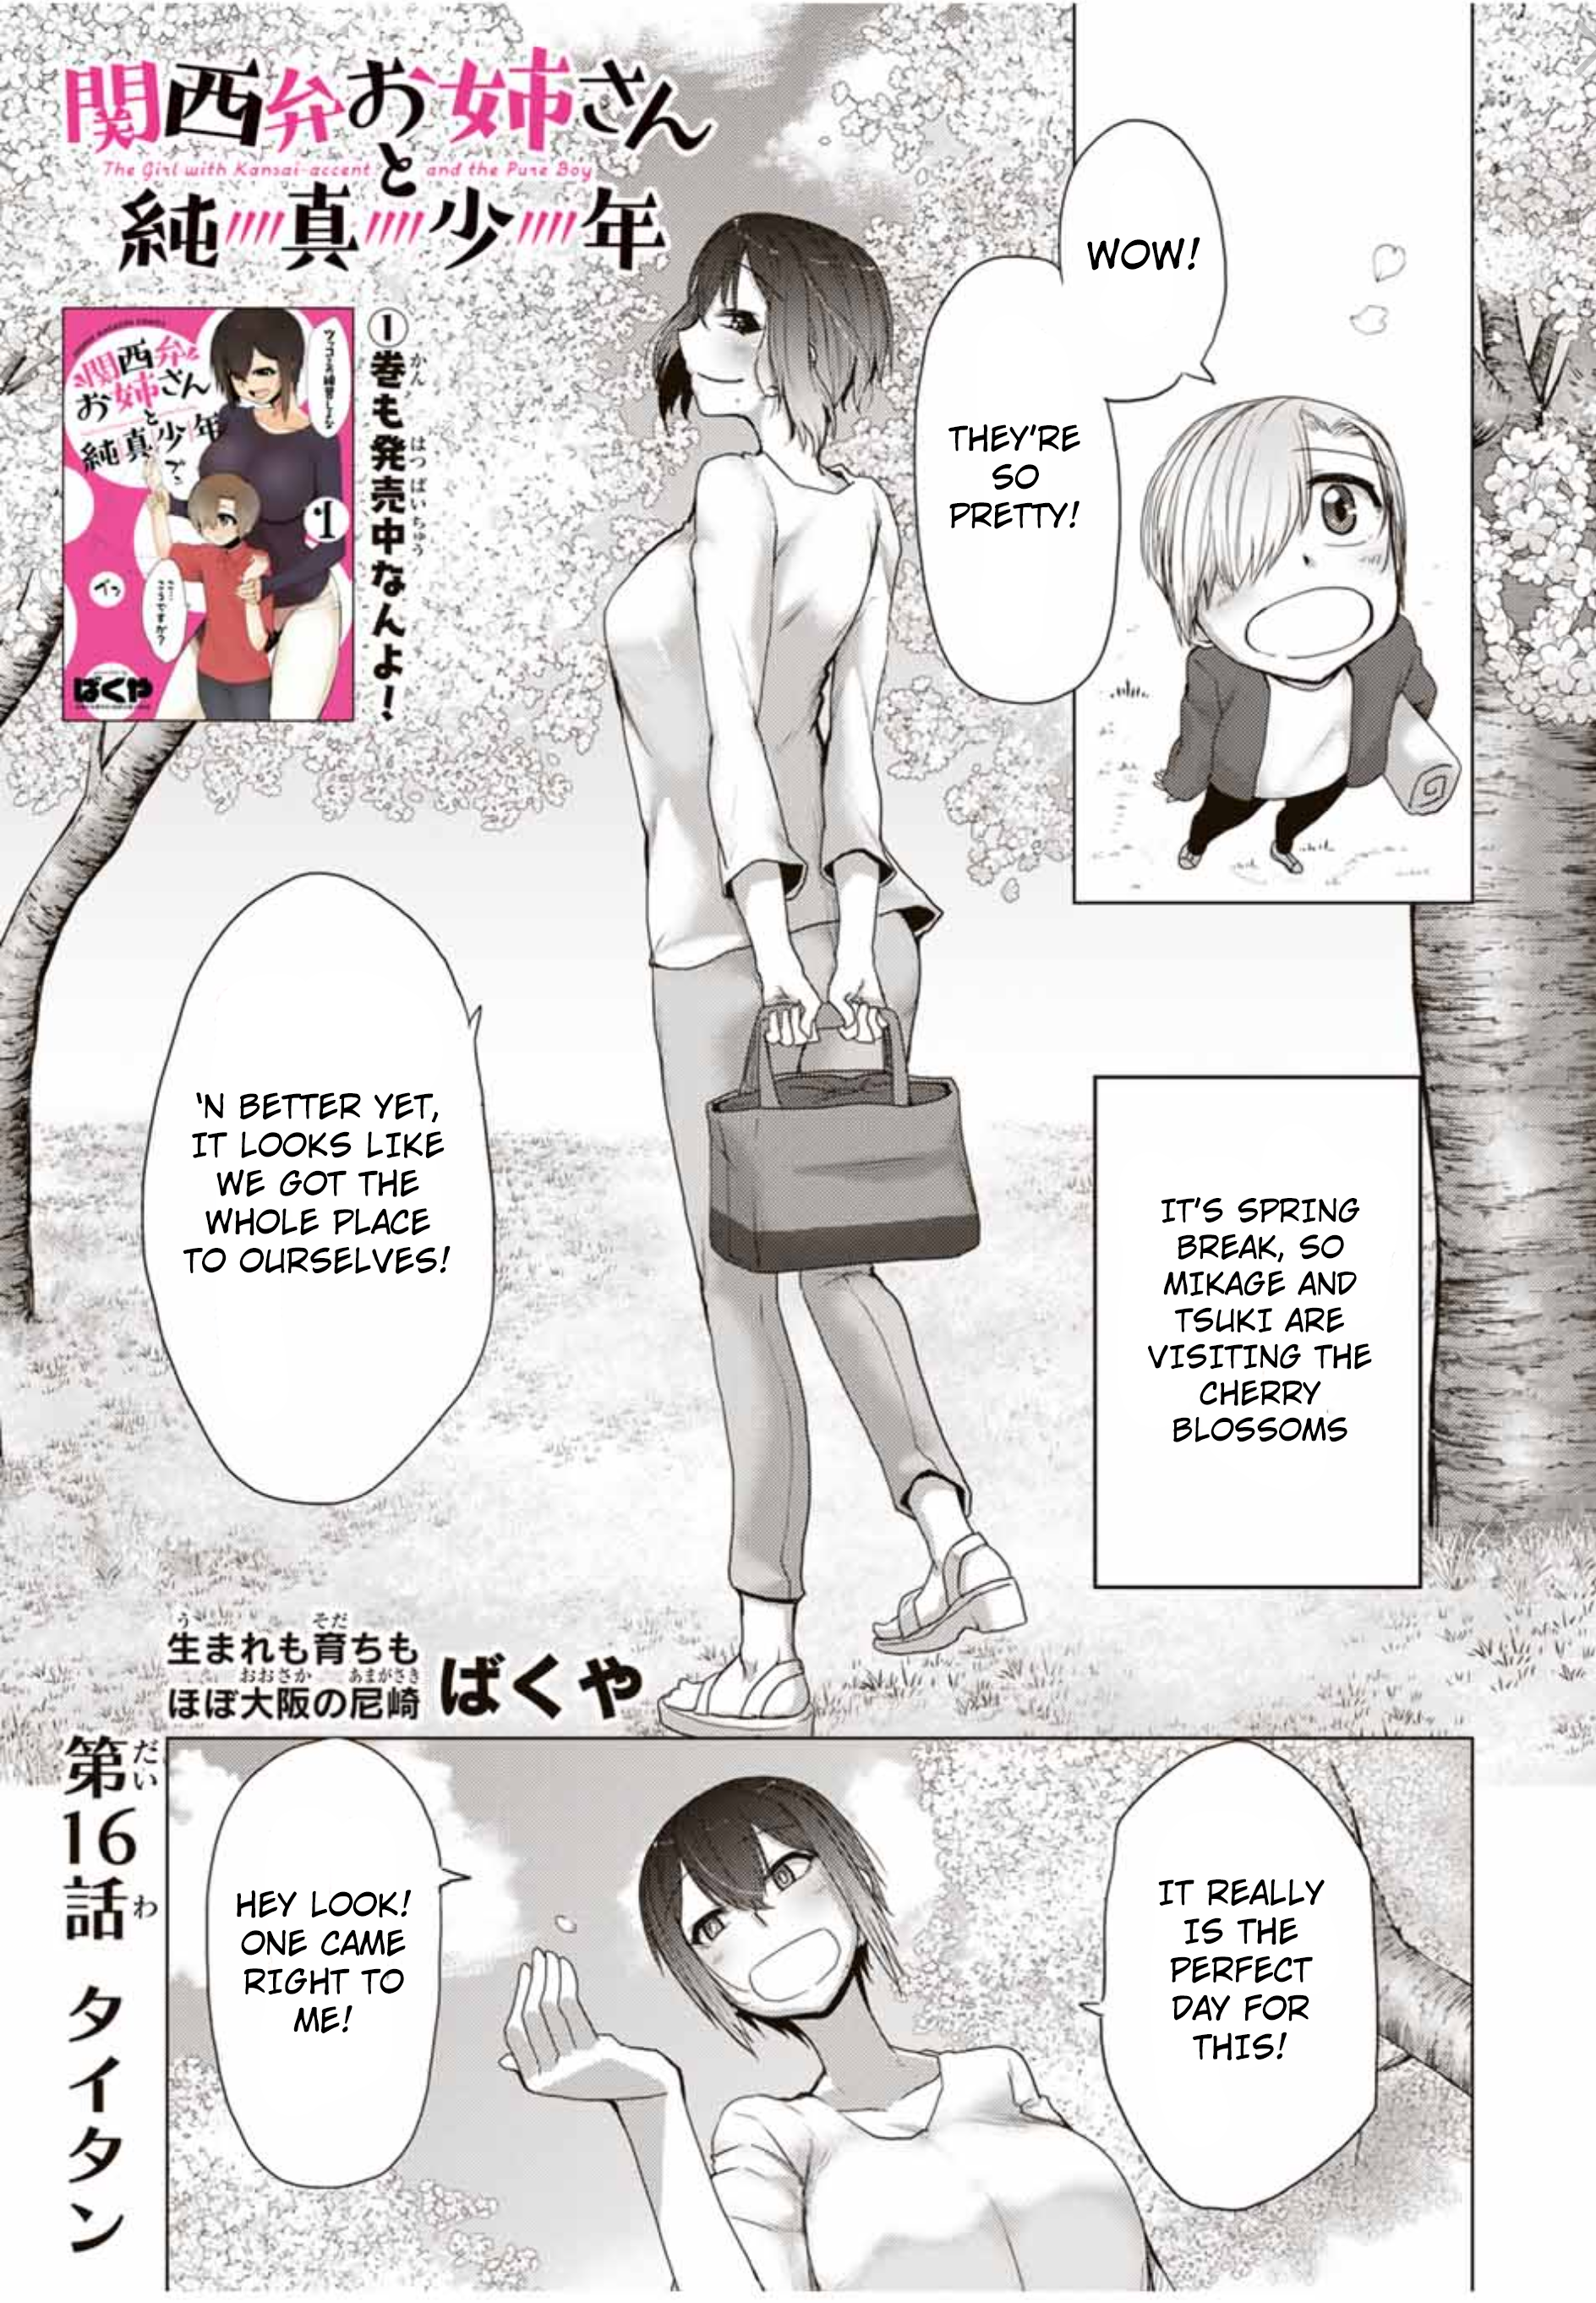 The Girl with a Kansai Accent and the Pure Boy - Chapter 16 Page 1